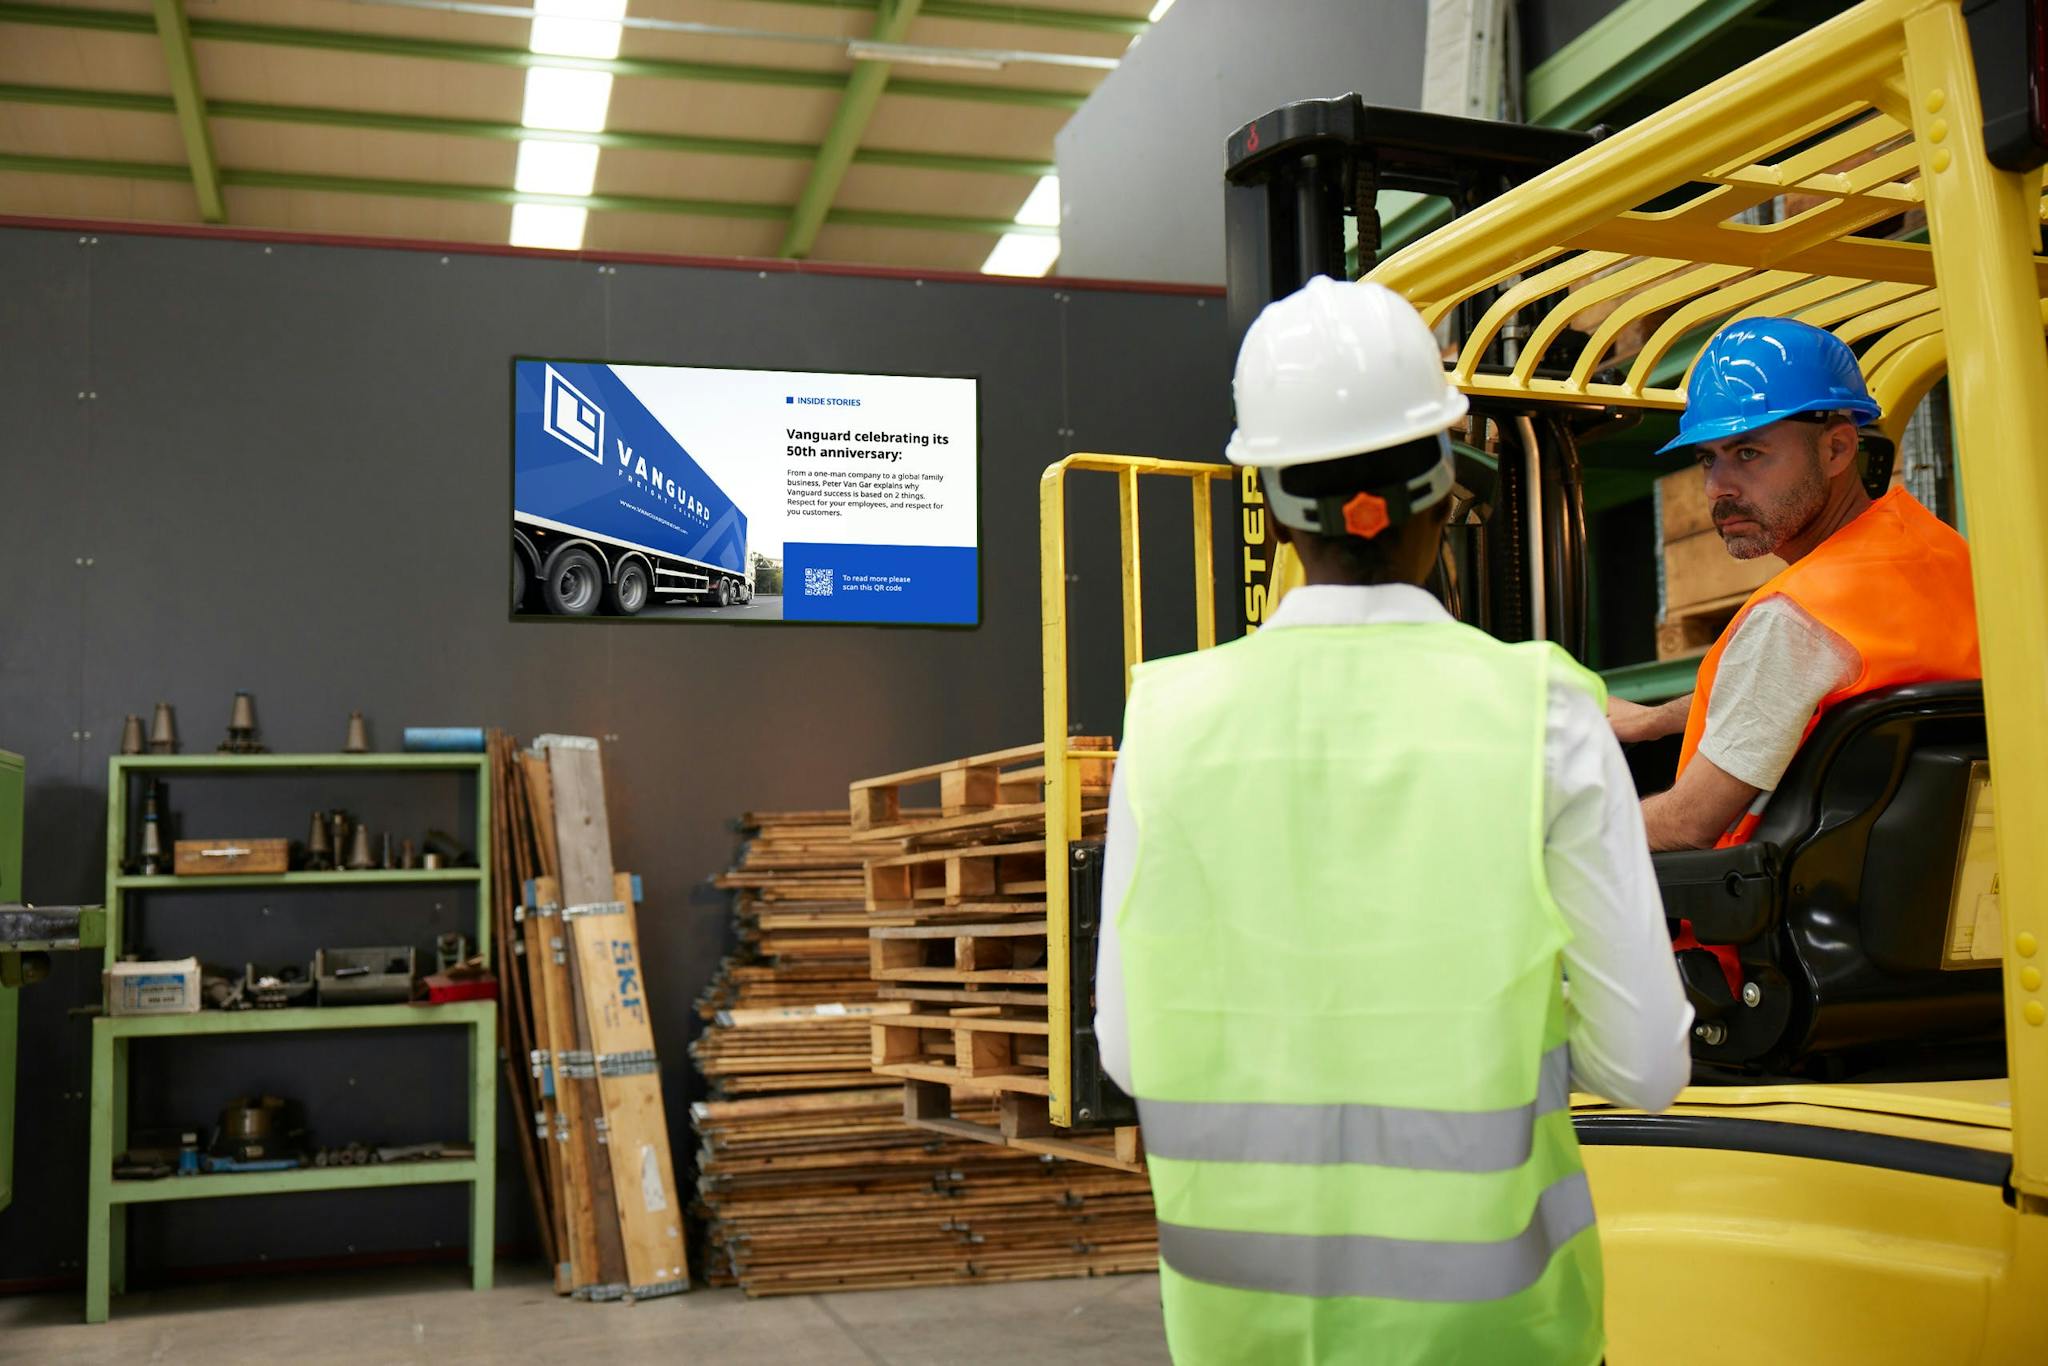 Two employees in a warehouse are speaking to each other with a digital sign in the background displaying information.